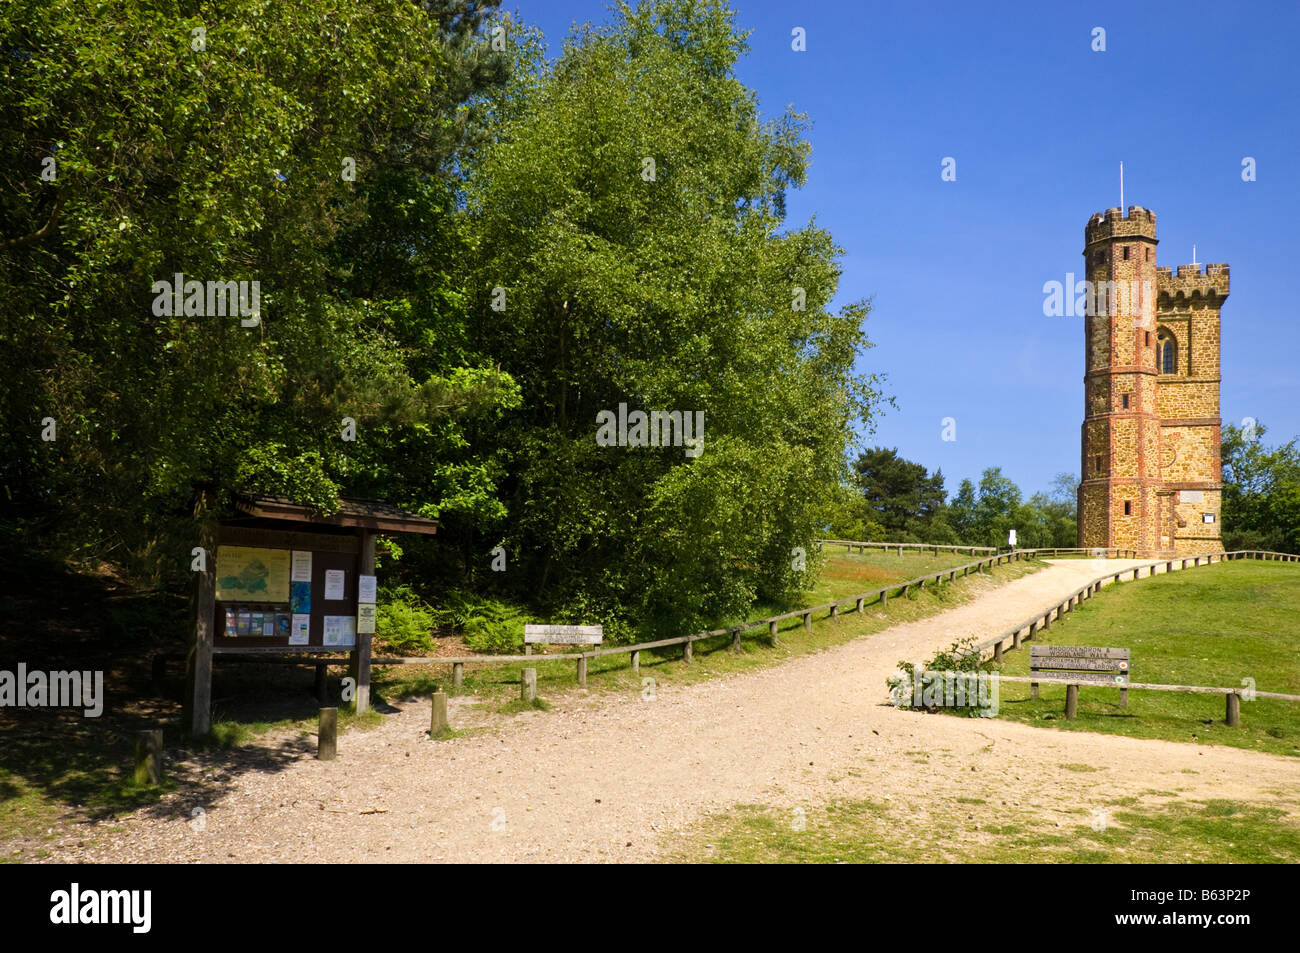 Leith Hill Tower, Surrey, England, UK Banque D'Images